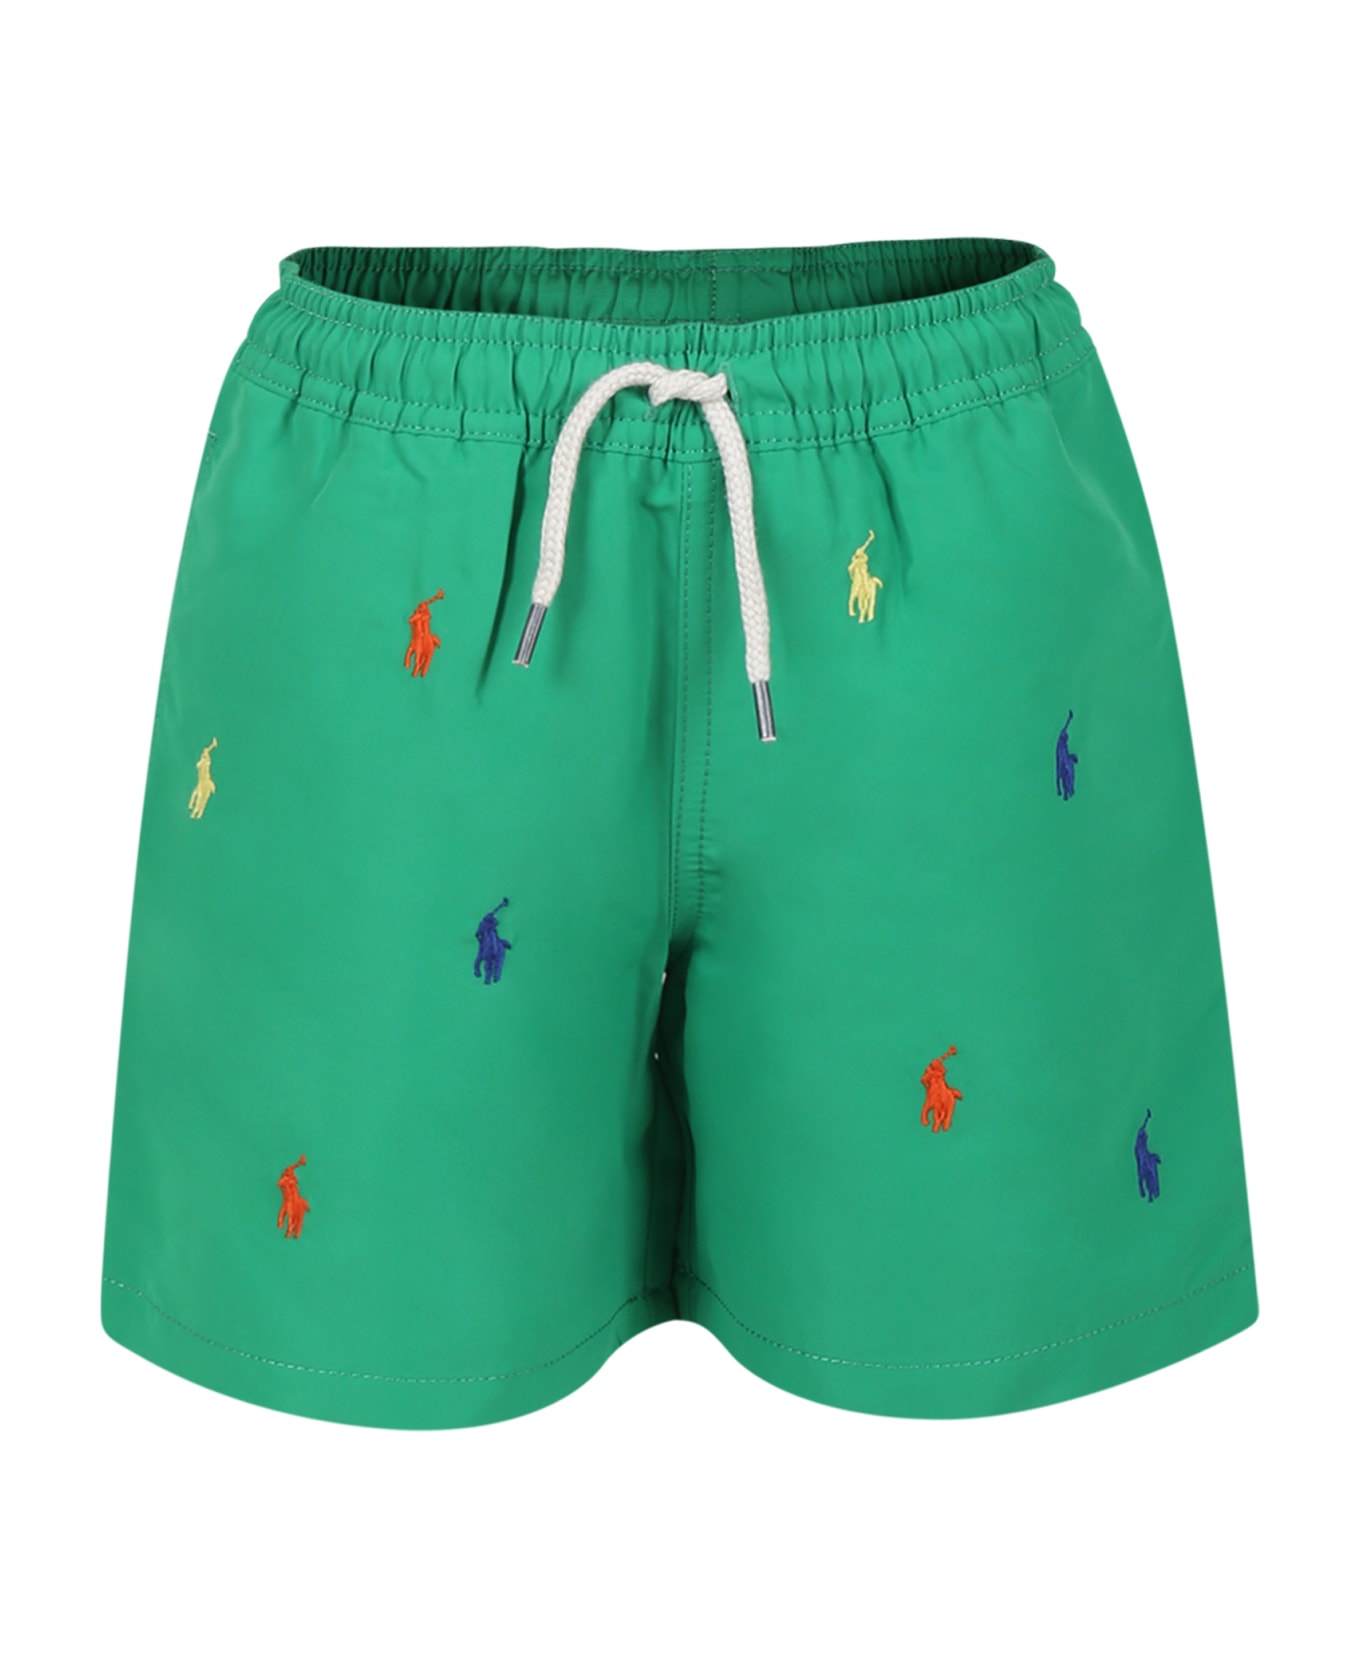 Ralph Lauren Green Swimsuit For Boy With Pony - Green